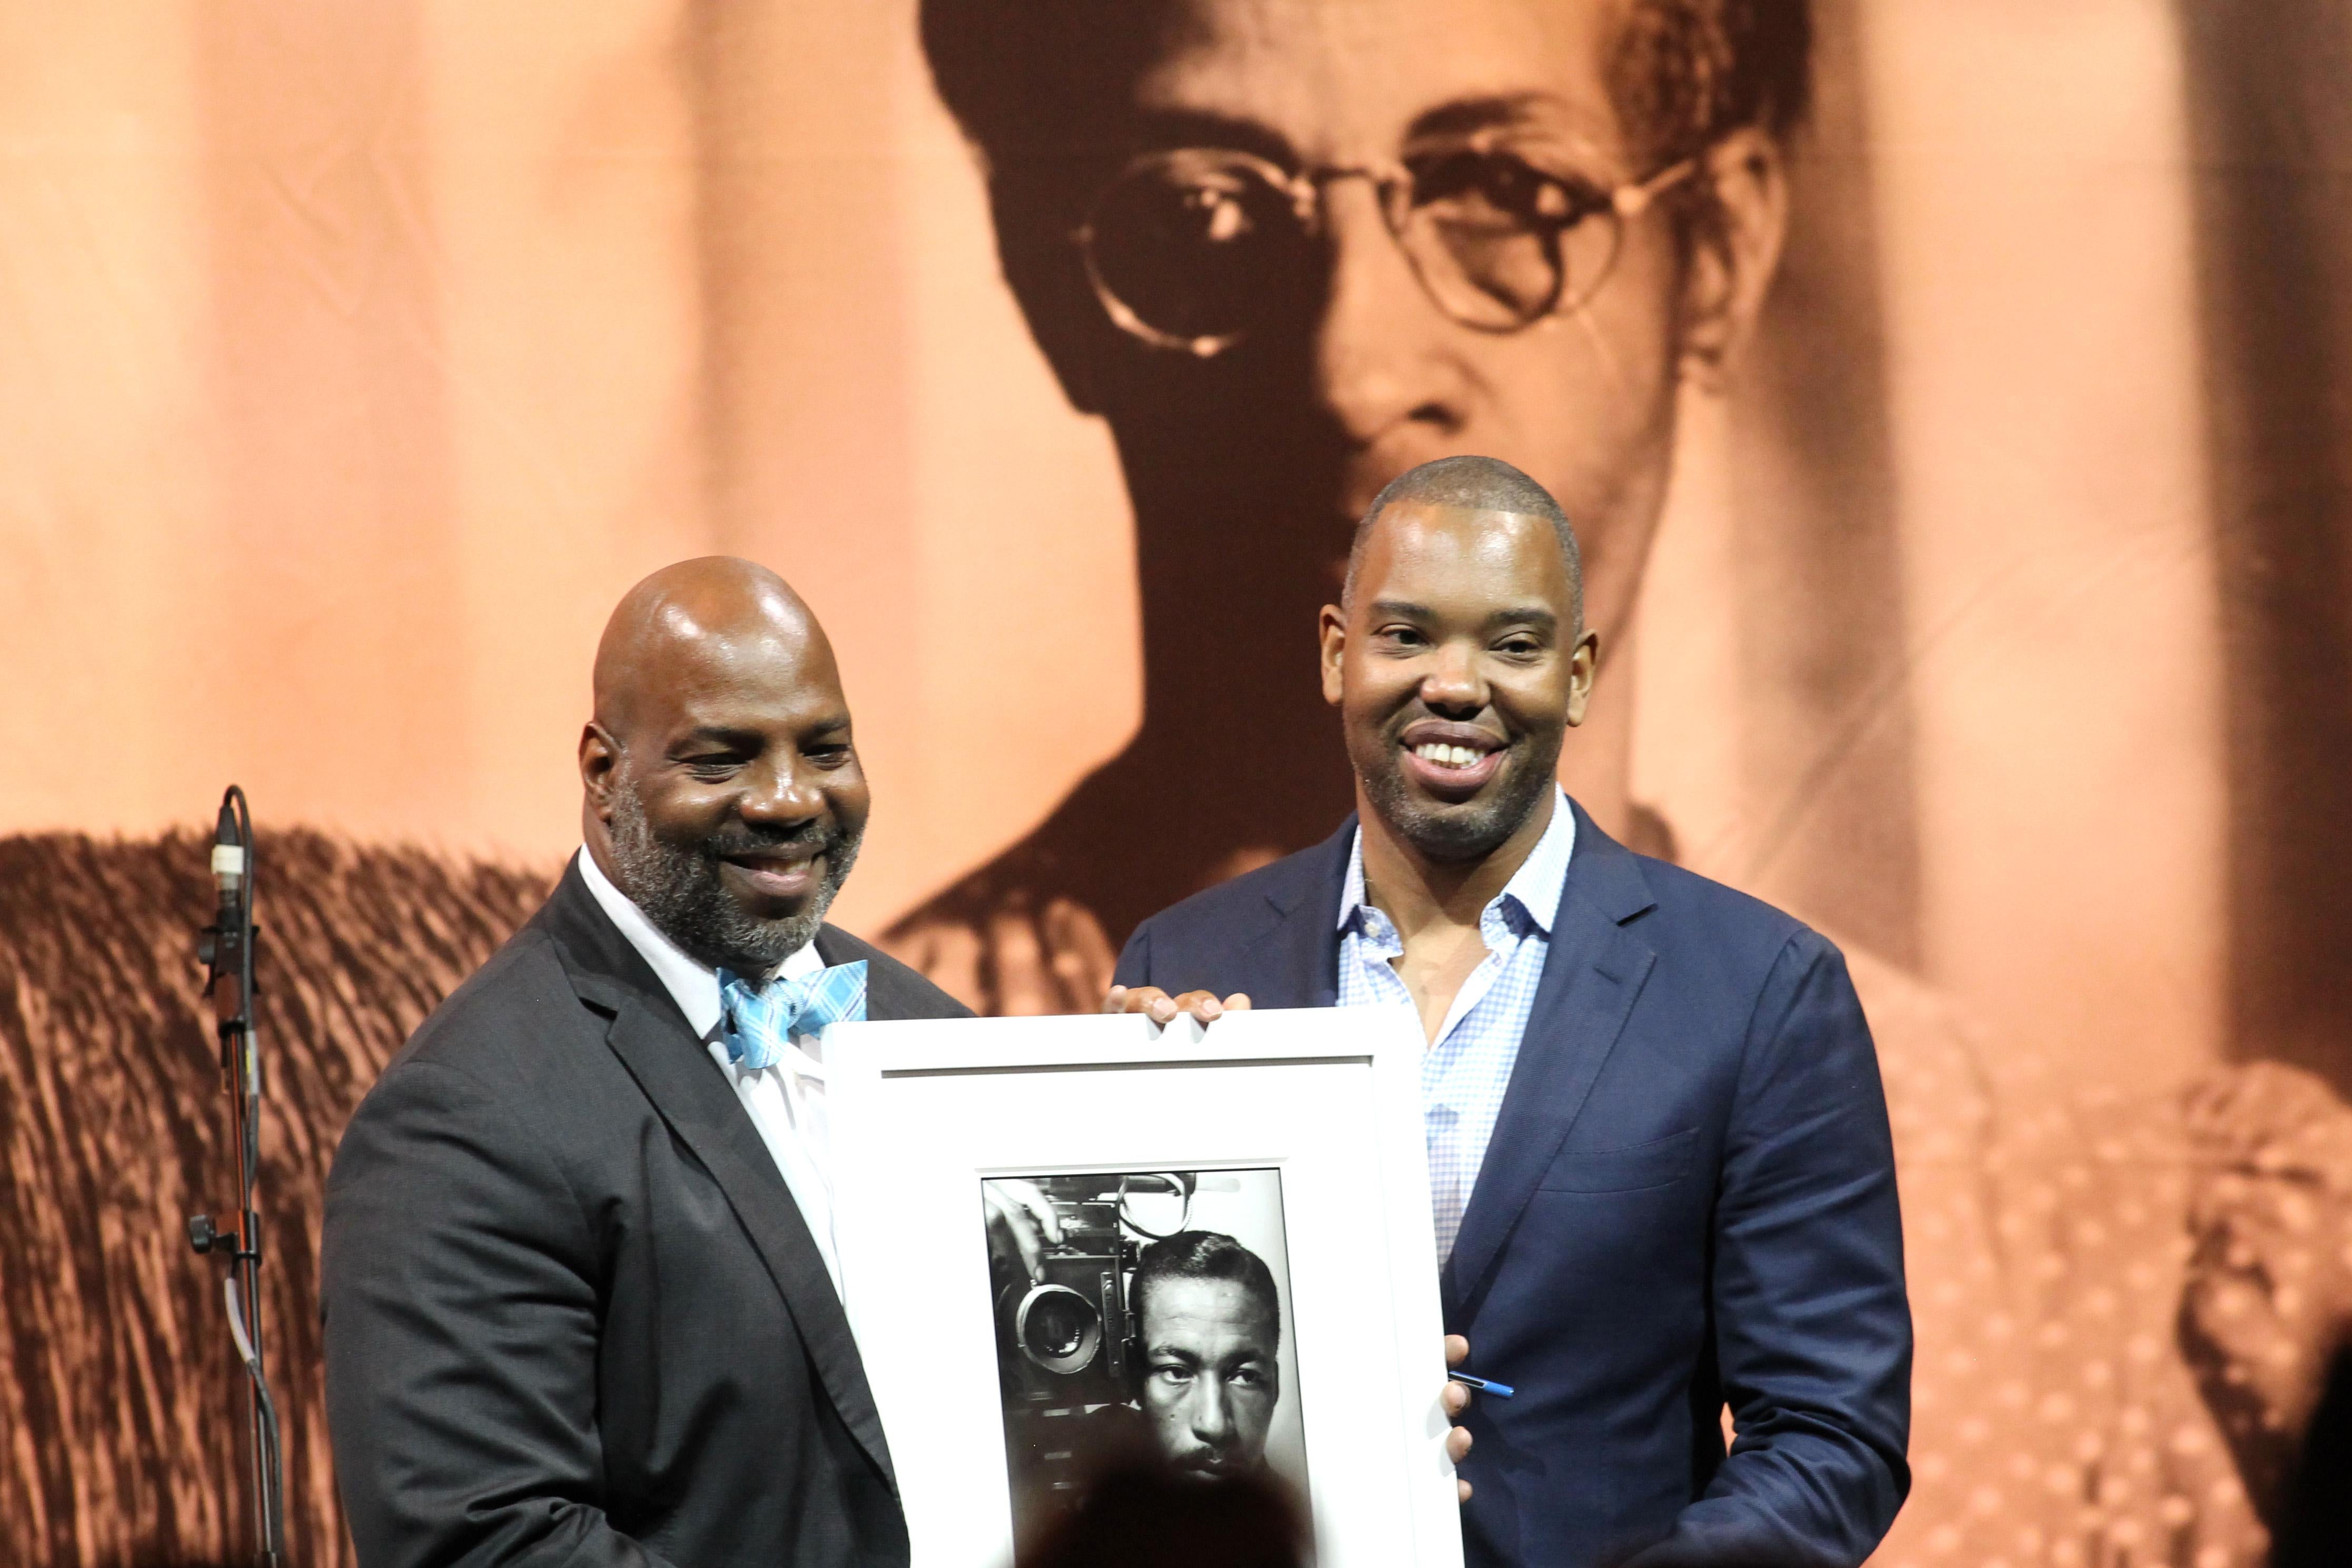 Journalist, presenter Jelani Cobb presents Honoree, Author Ta-Nehisi Coates on stage at Gordon Parks Foundation: 2018 Awards Dinner & Auction at Cipriani 42nd Street on May 22, 2018 in New York City.  (Photo by Bennett Raglin/Getty Images for Gordon Parks Foundation)